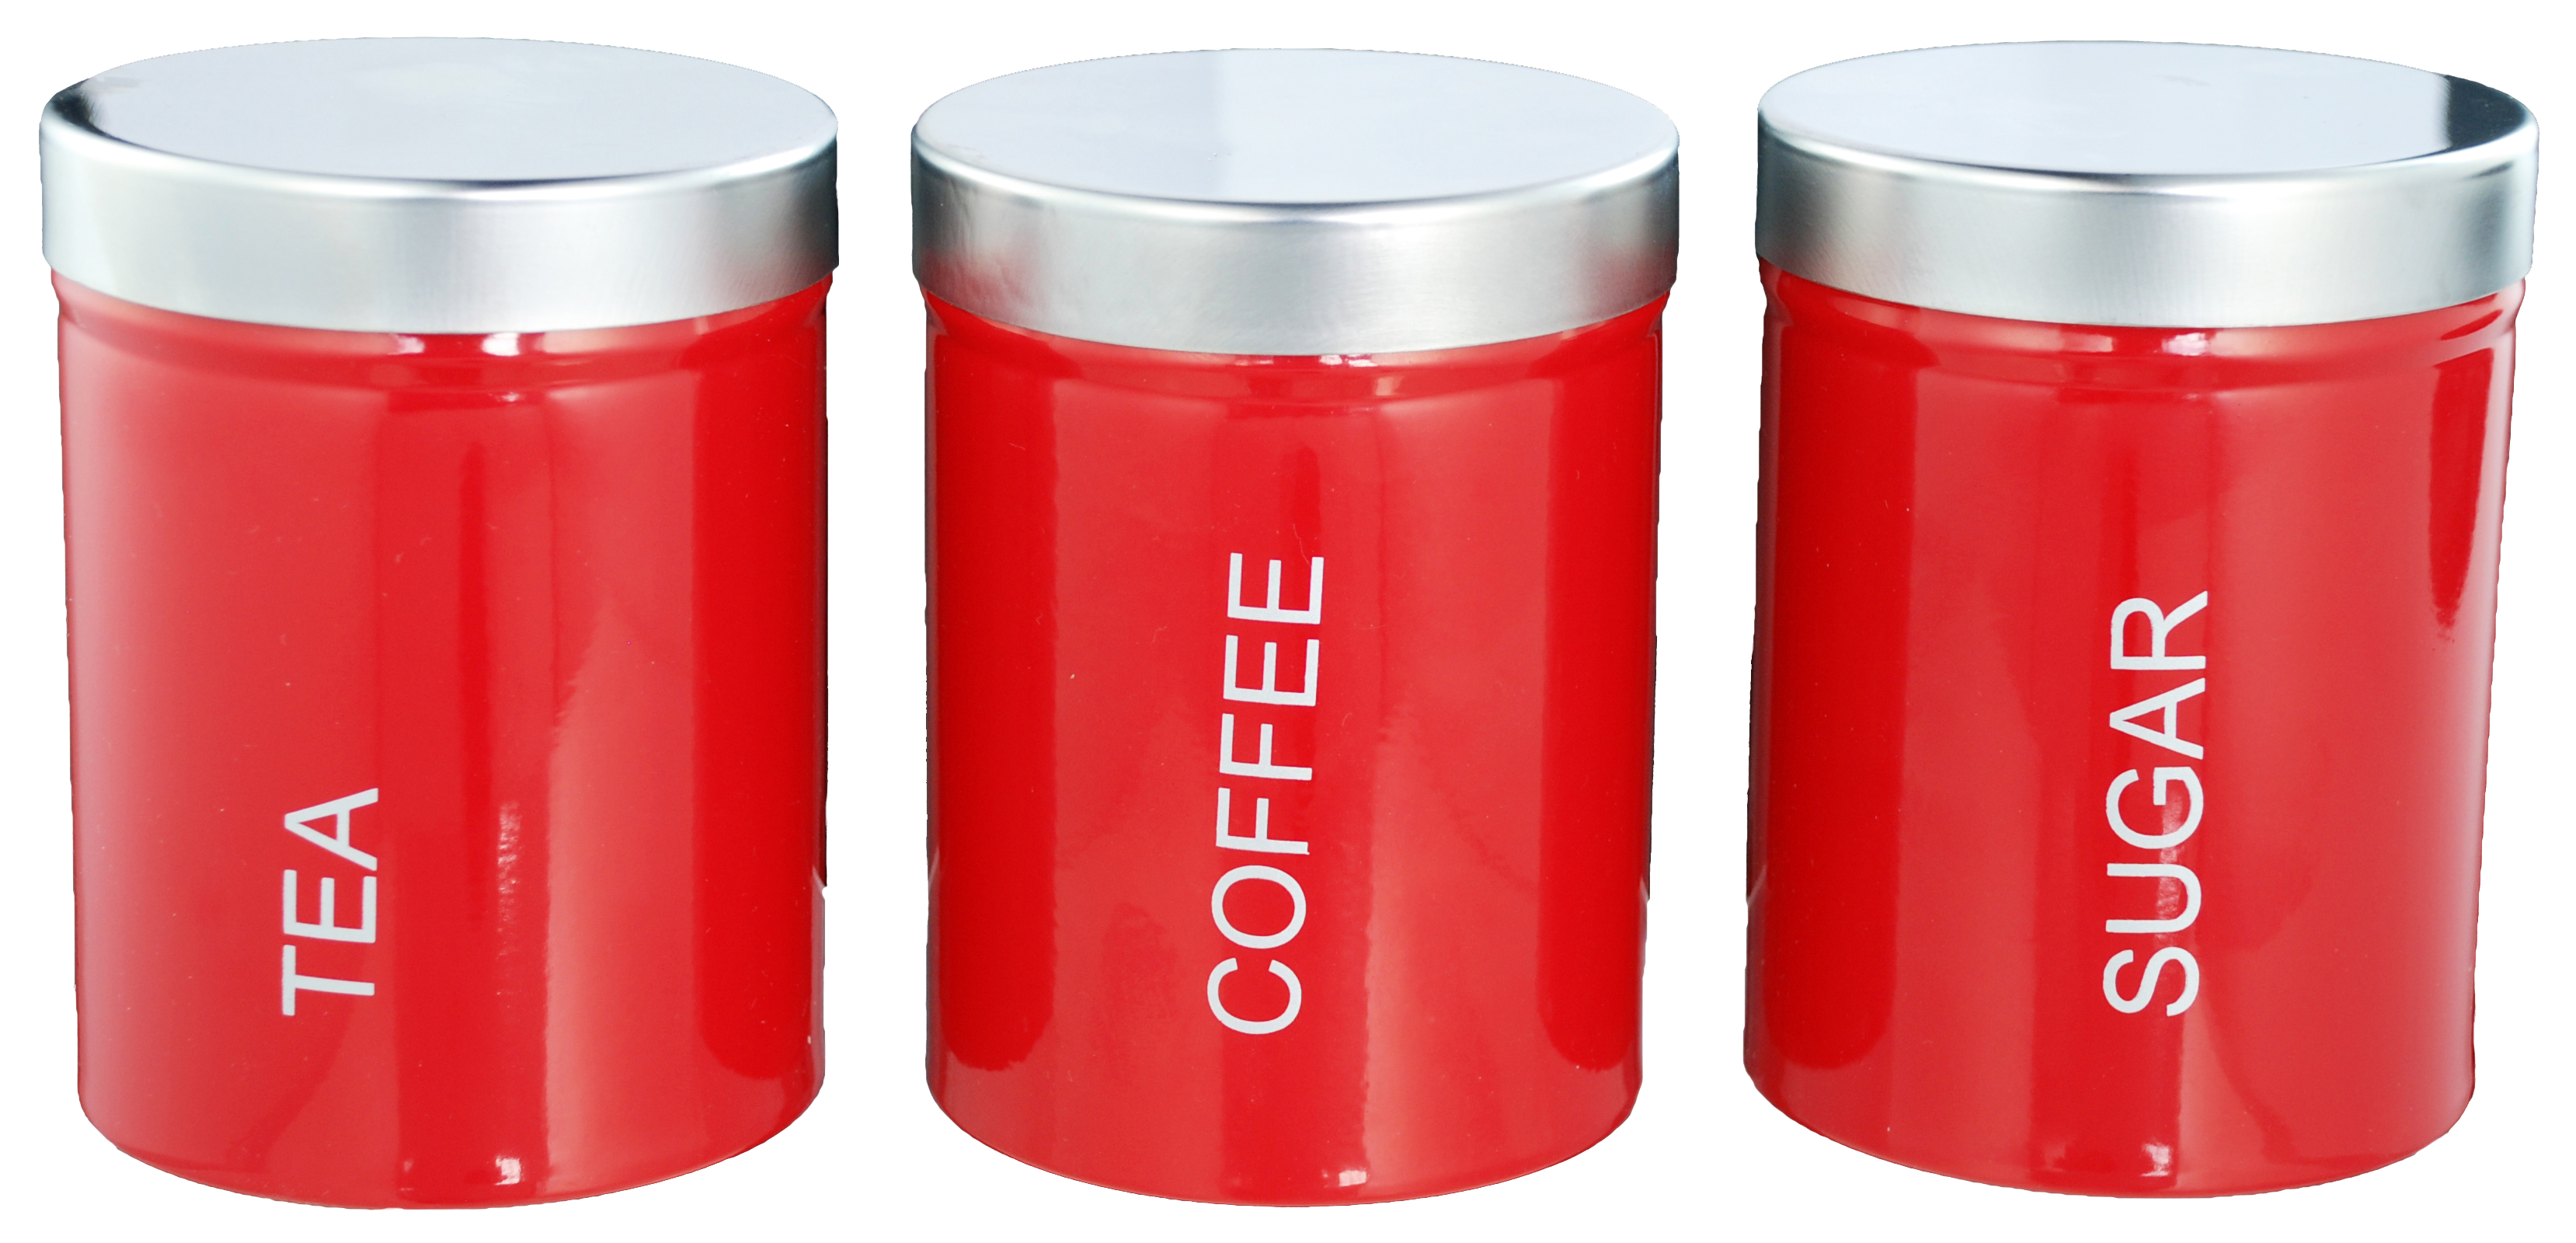 Buckingham Set of Three Kitchen Storage Canisters Jar Ideal for Tea Coffee and Sugar - Red